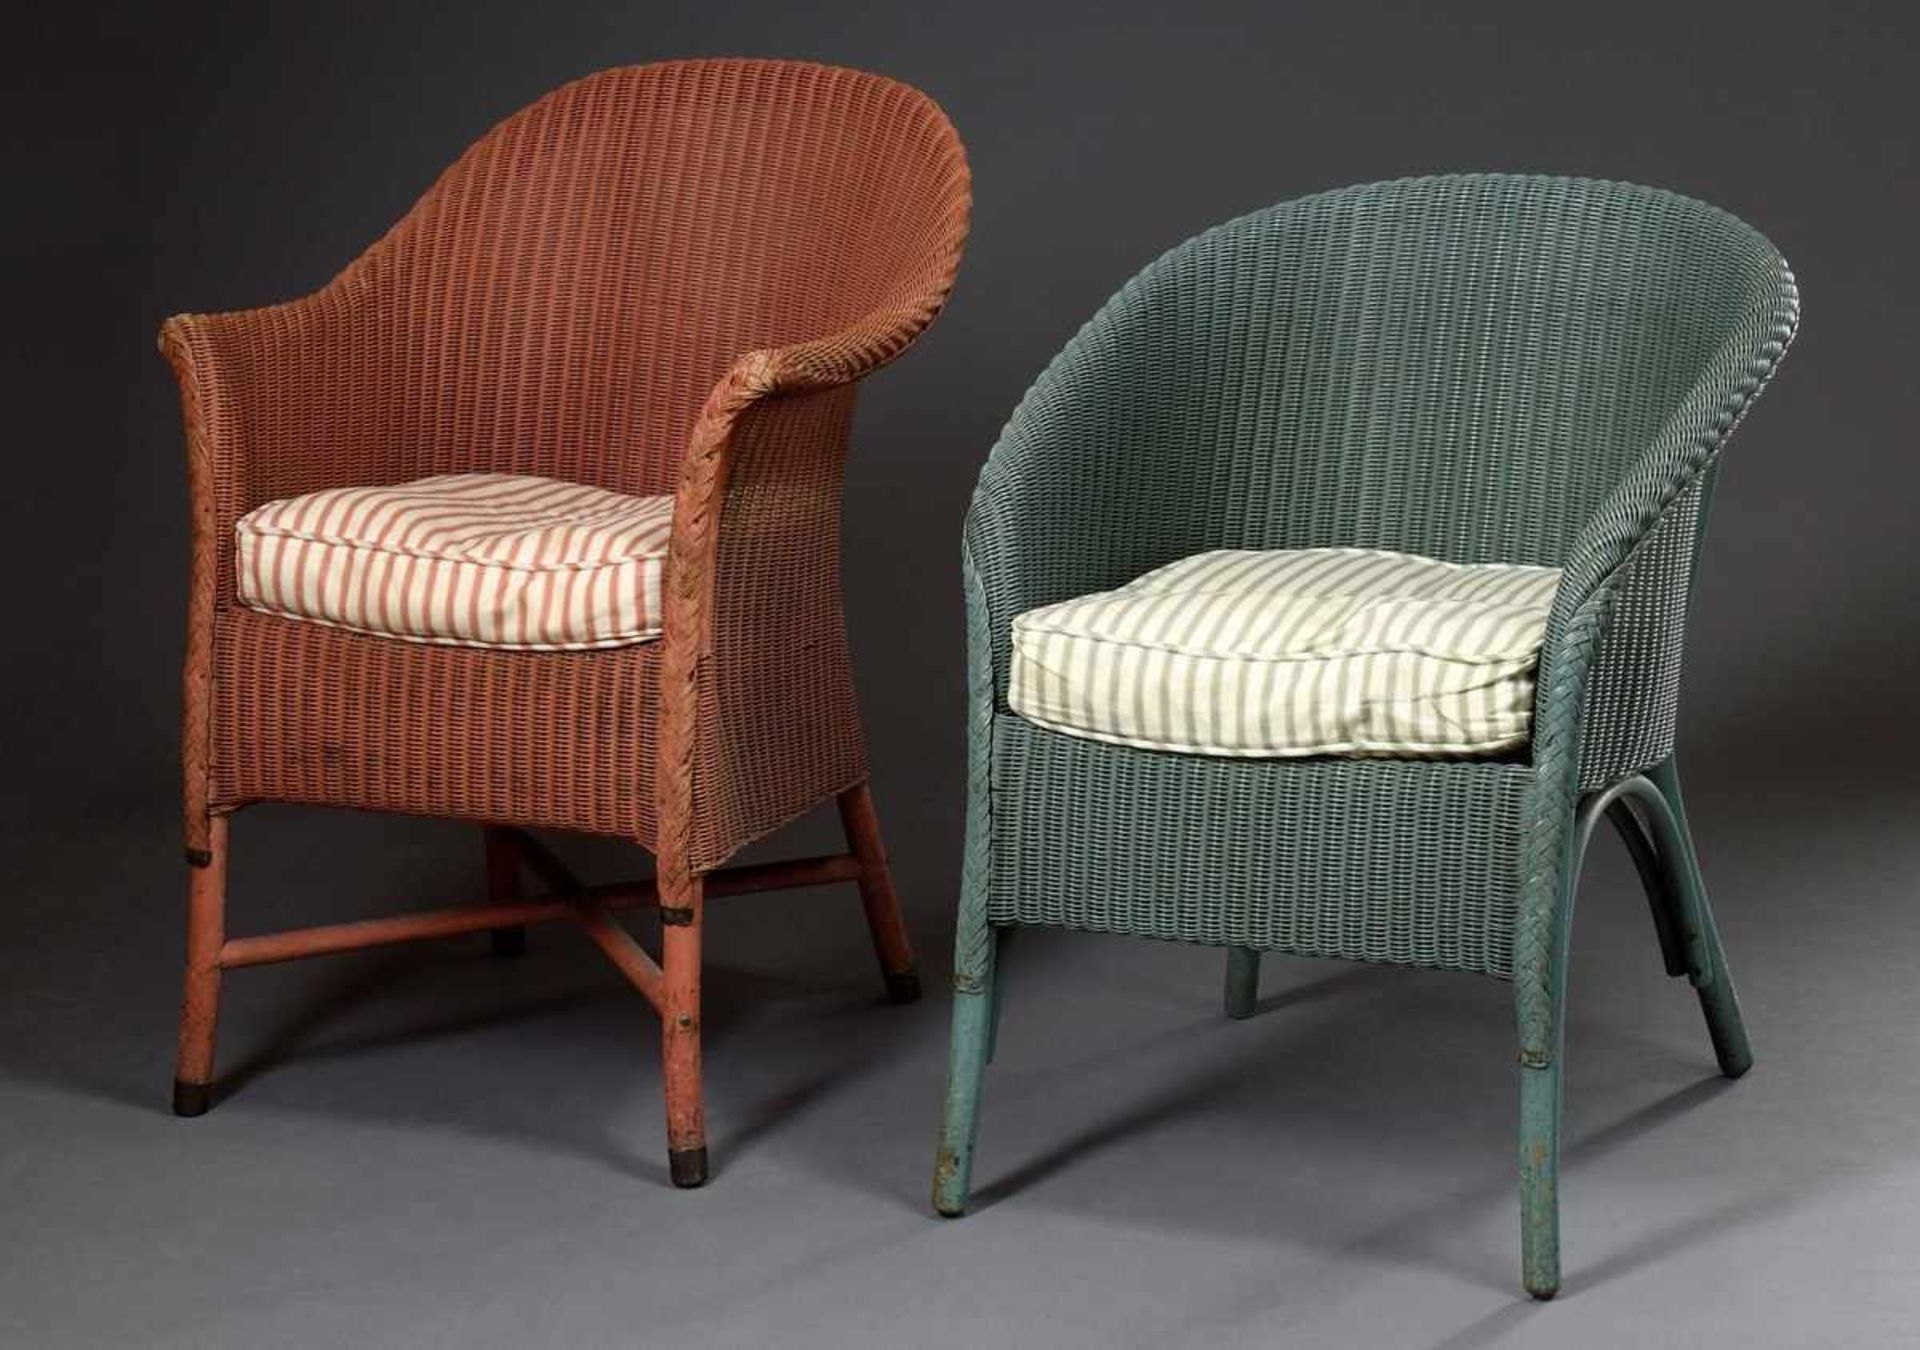 2 Various Lloyd Loom chairs, pink/green with matching cushions, h. 42/76cm and39/69cm, small